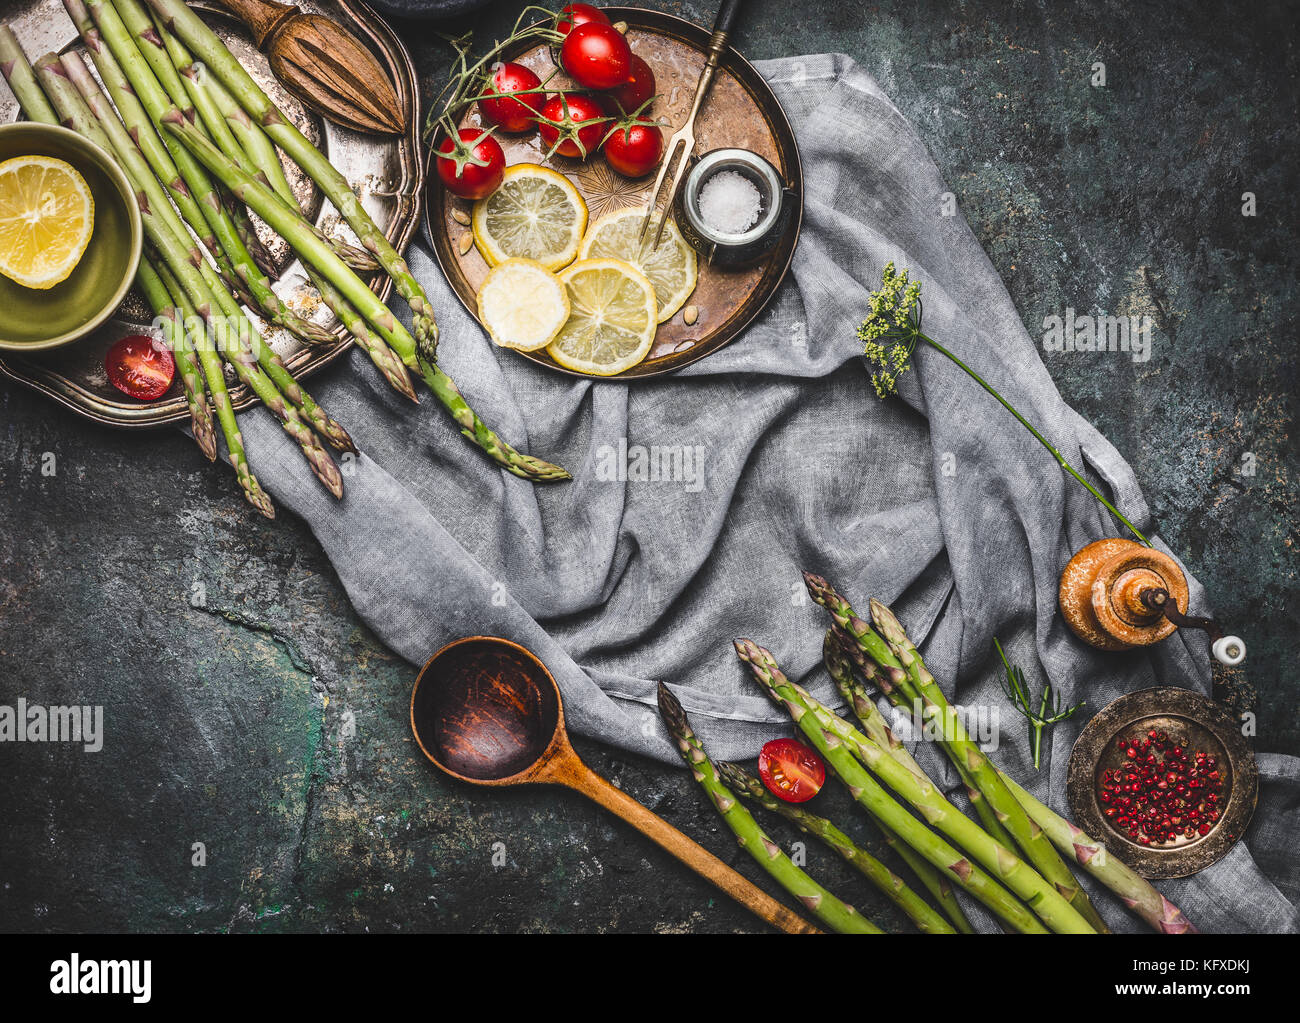 Asparagus with wooden spoon and cooking ingredients, preparation on dark rustic background, top view, frame Stock Photo